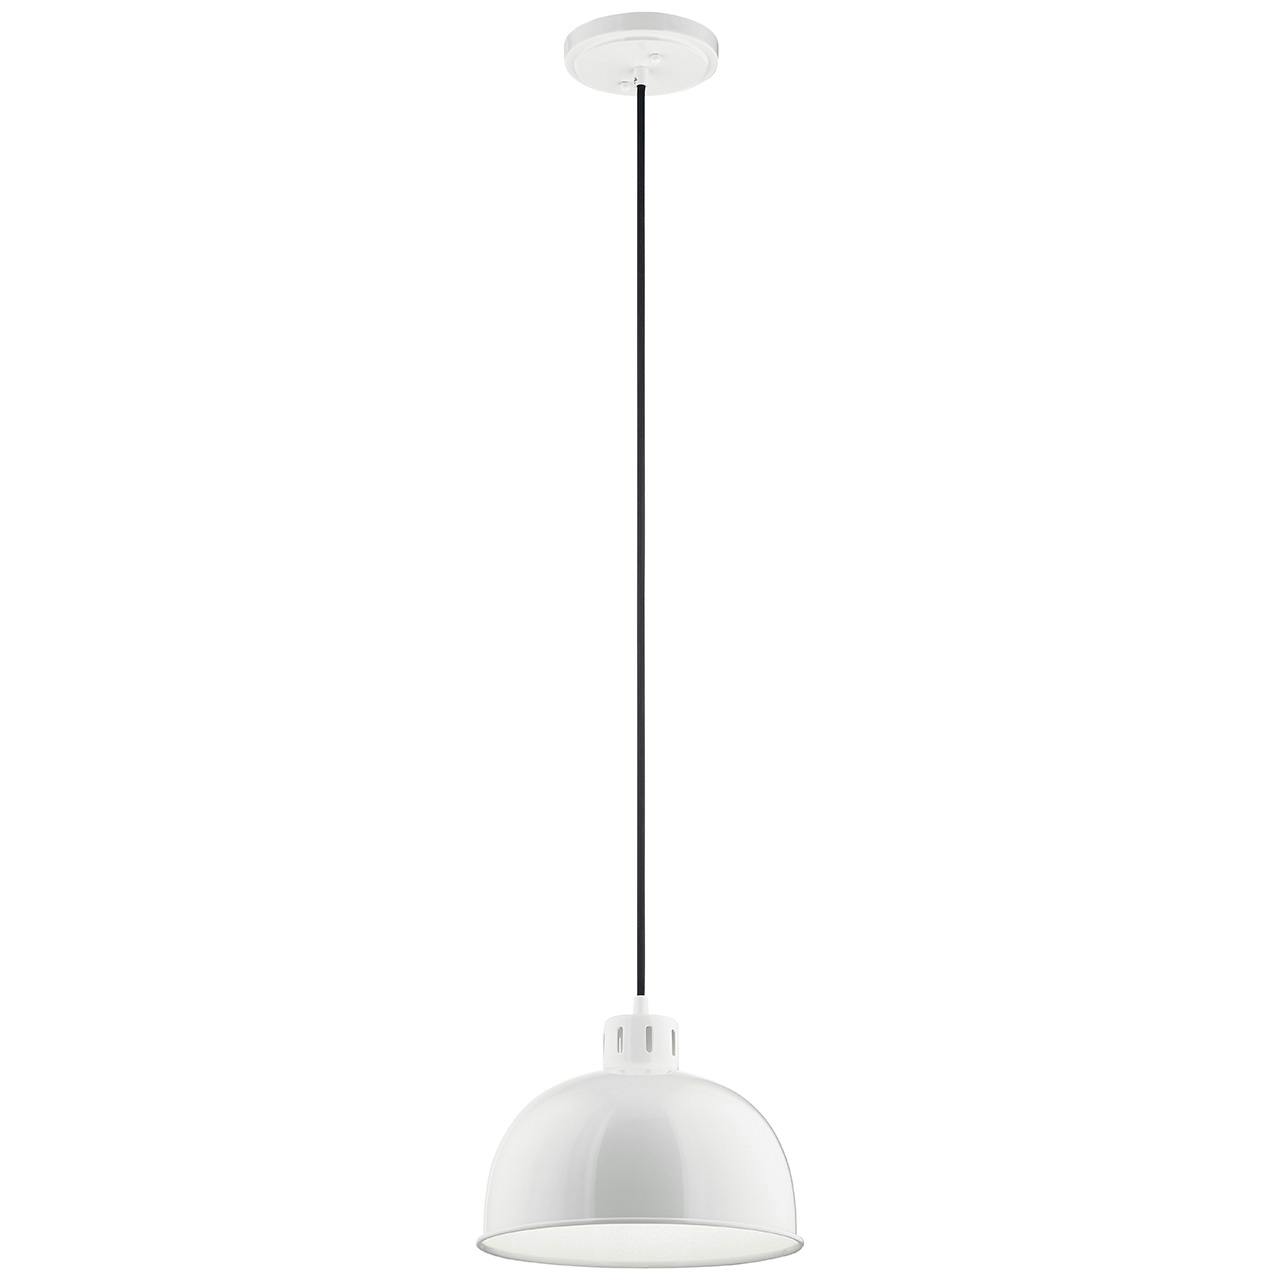 Zailey™ 9" 1 Light Pendant in White on a white background